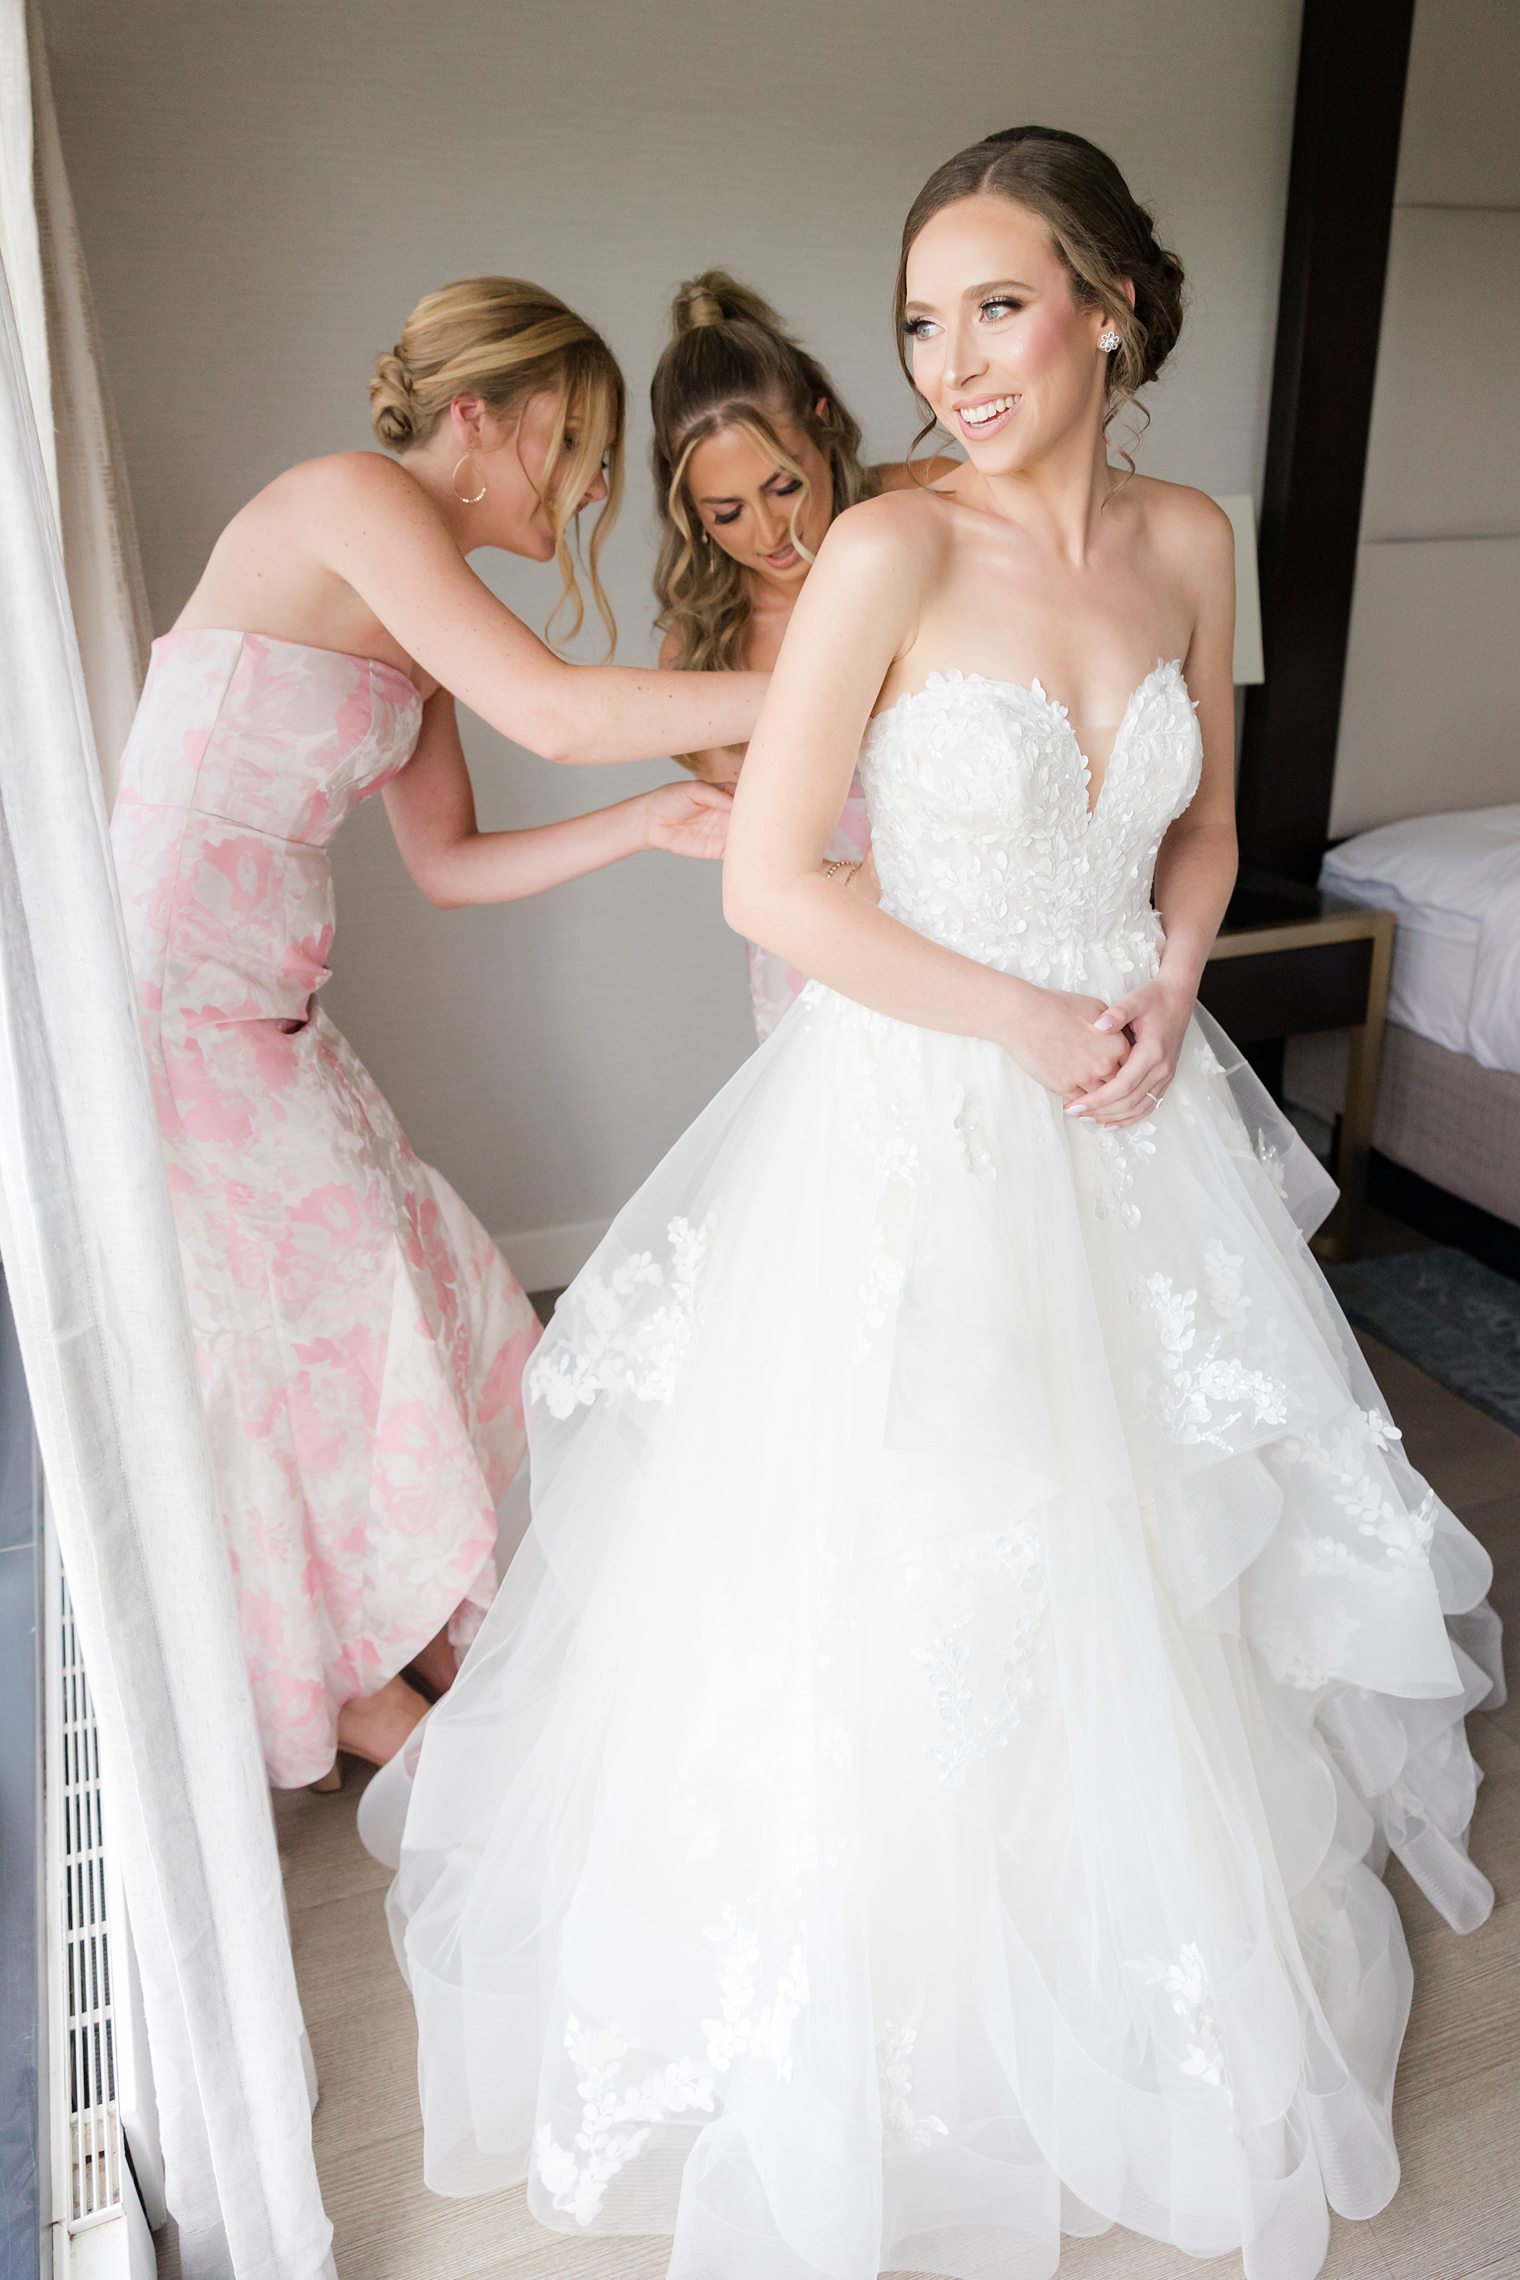 Bridesmaids helping the bride to finish get ready